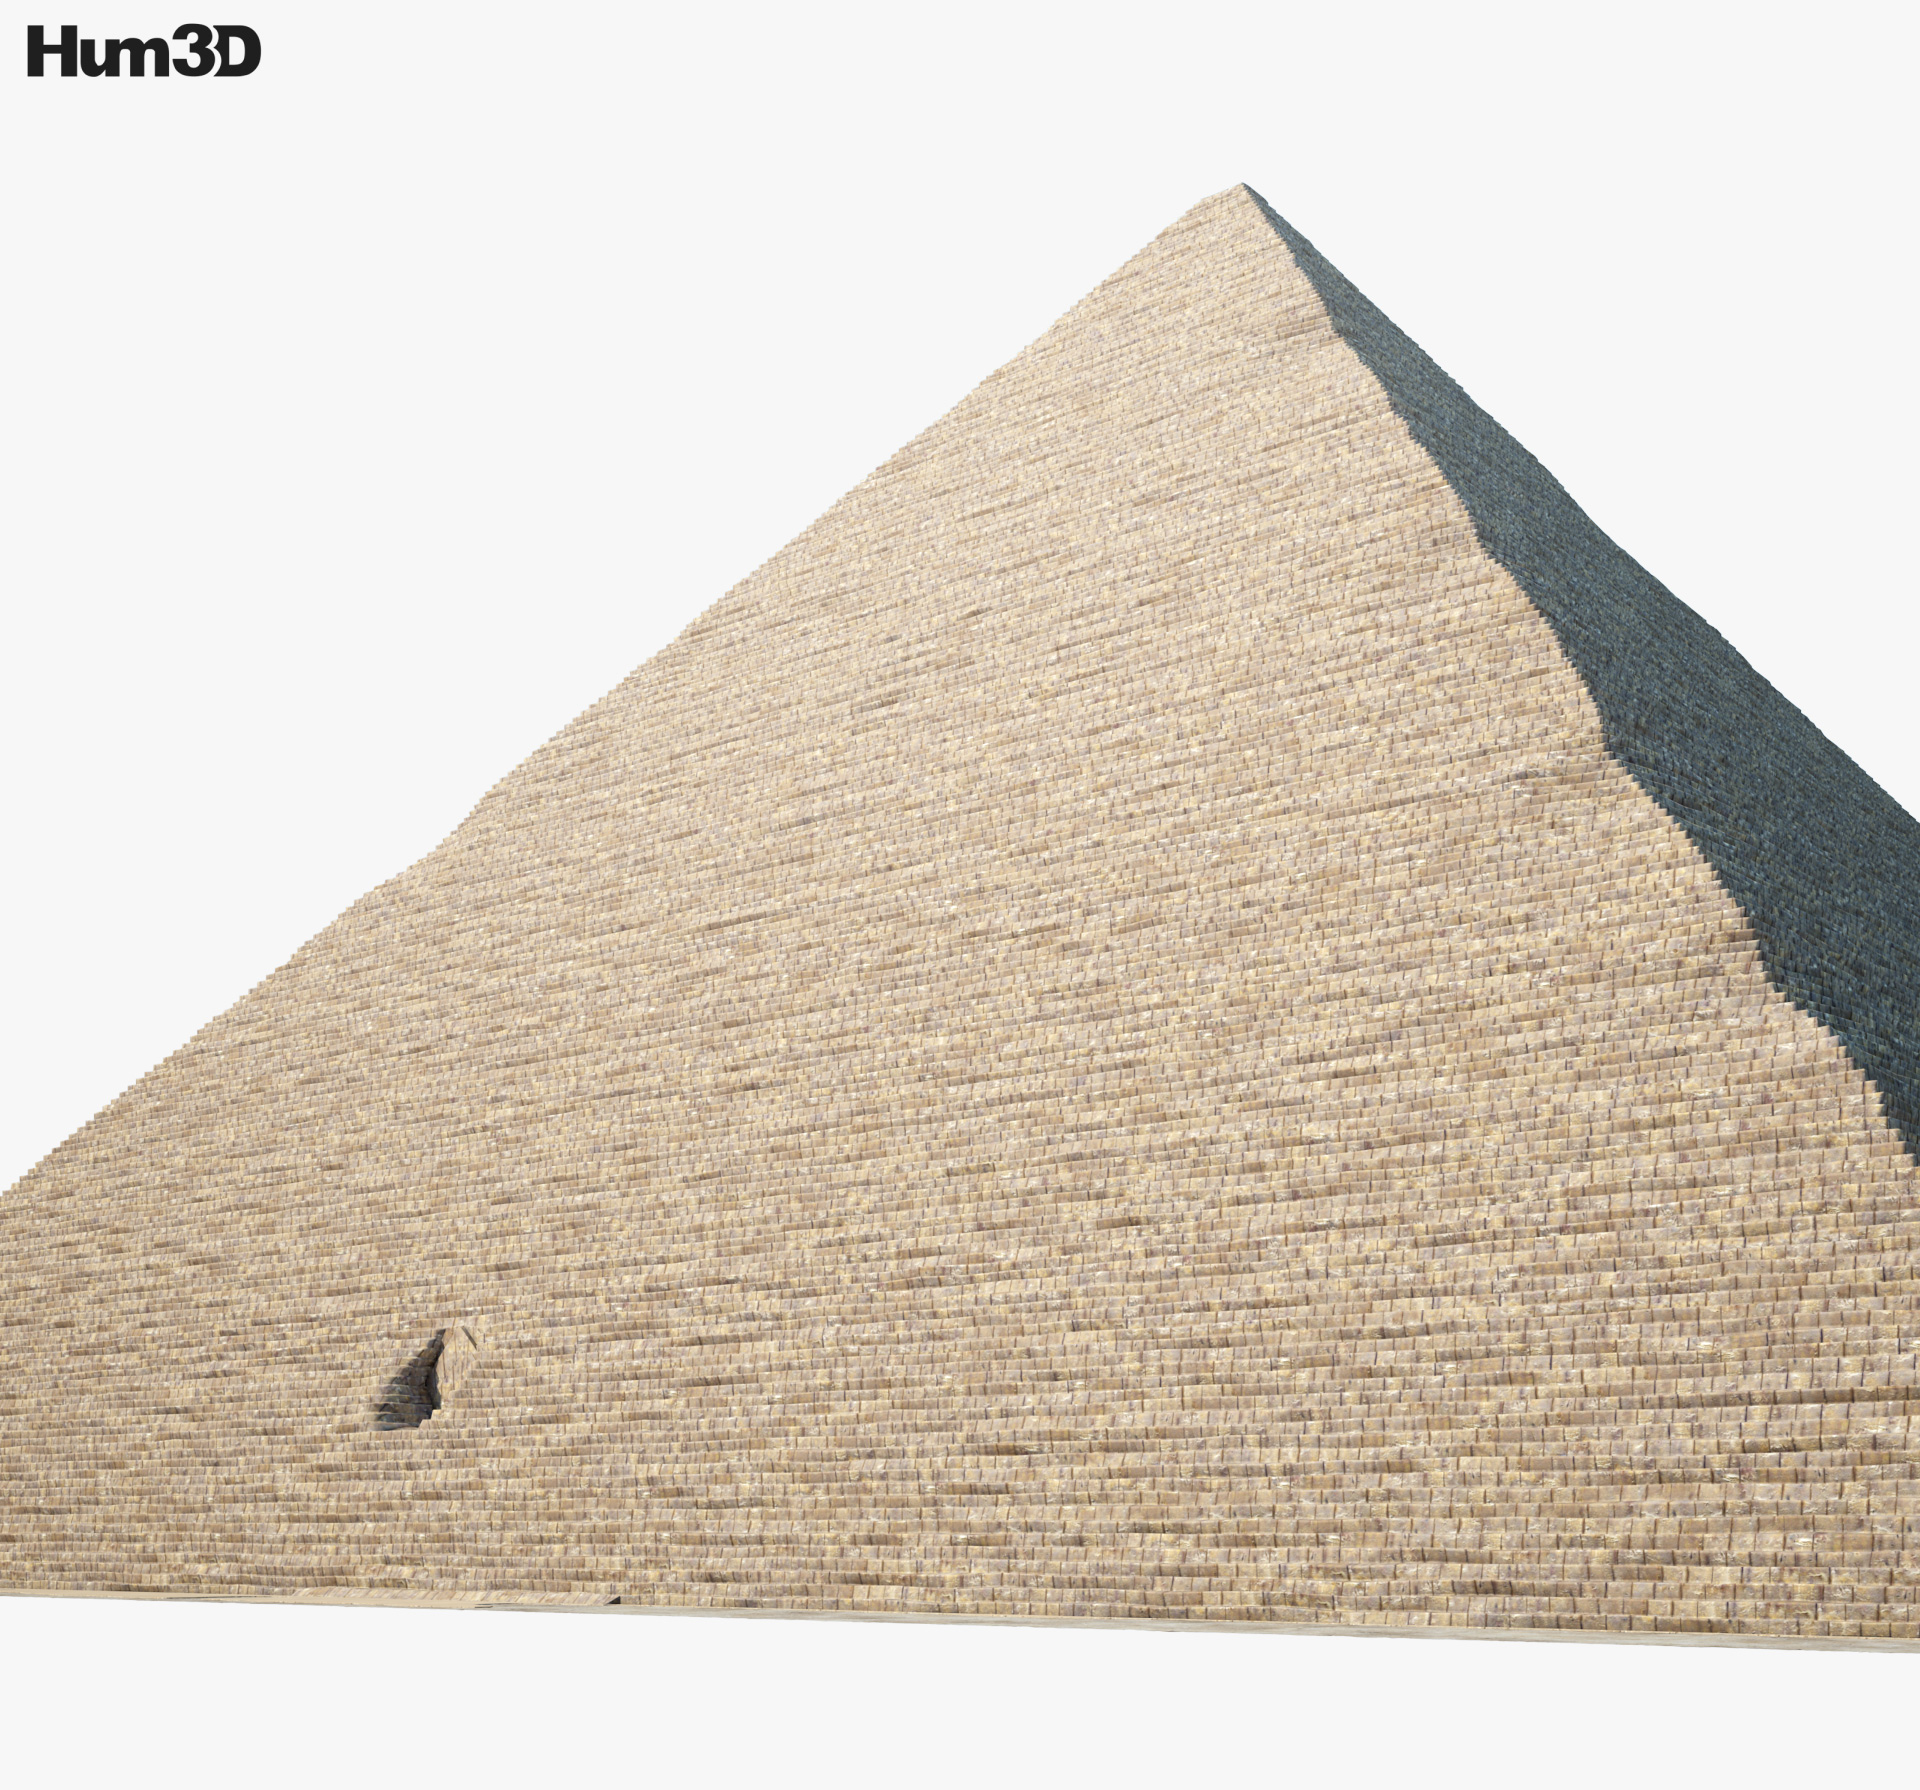 Pyramid of Cheops 3d model